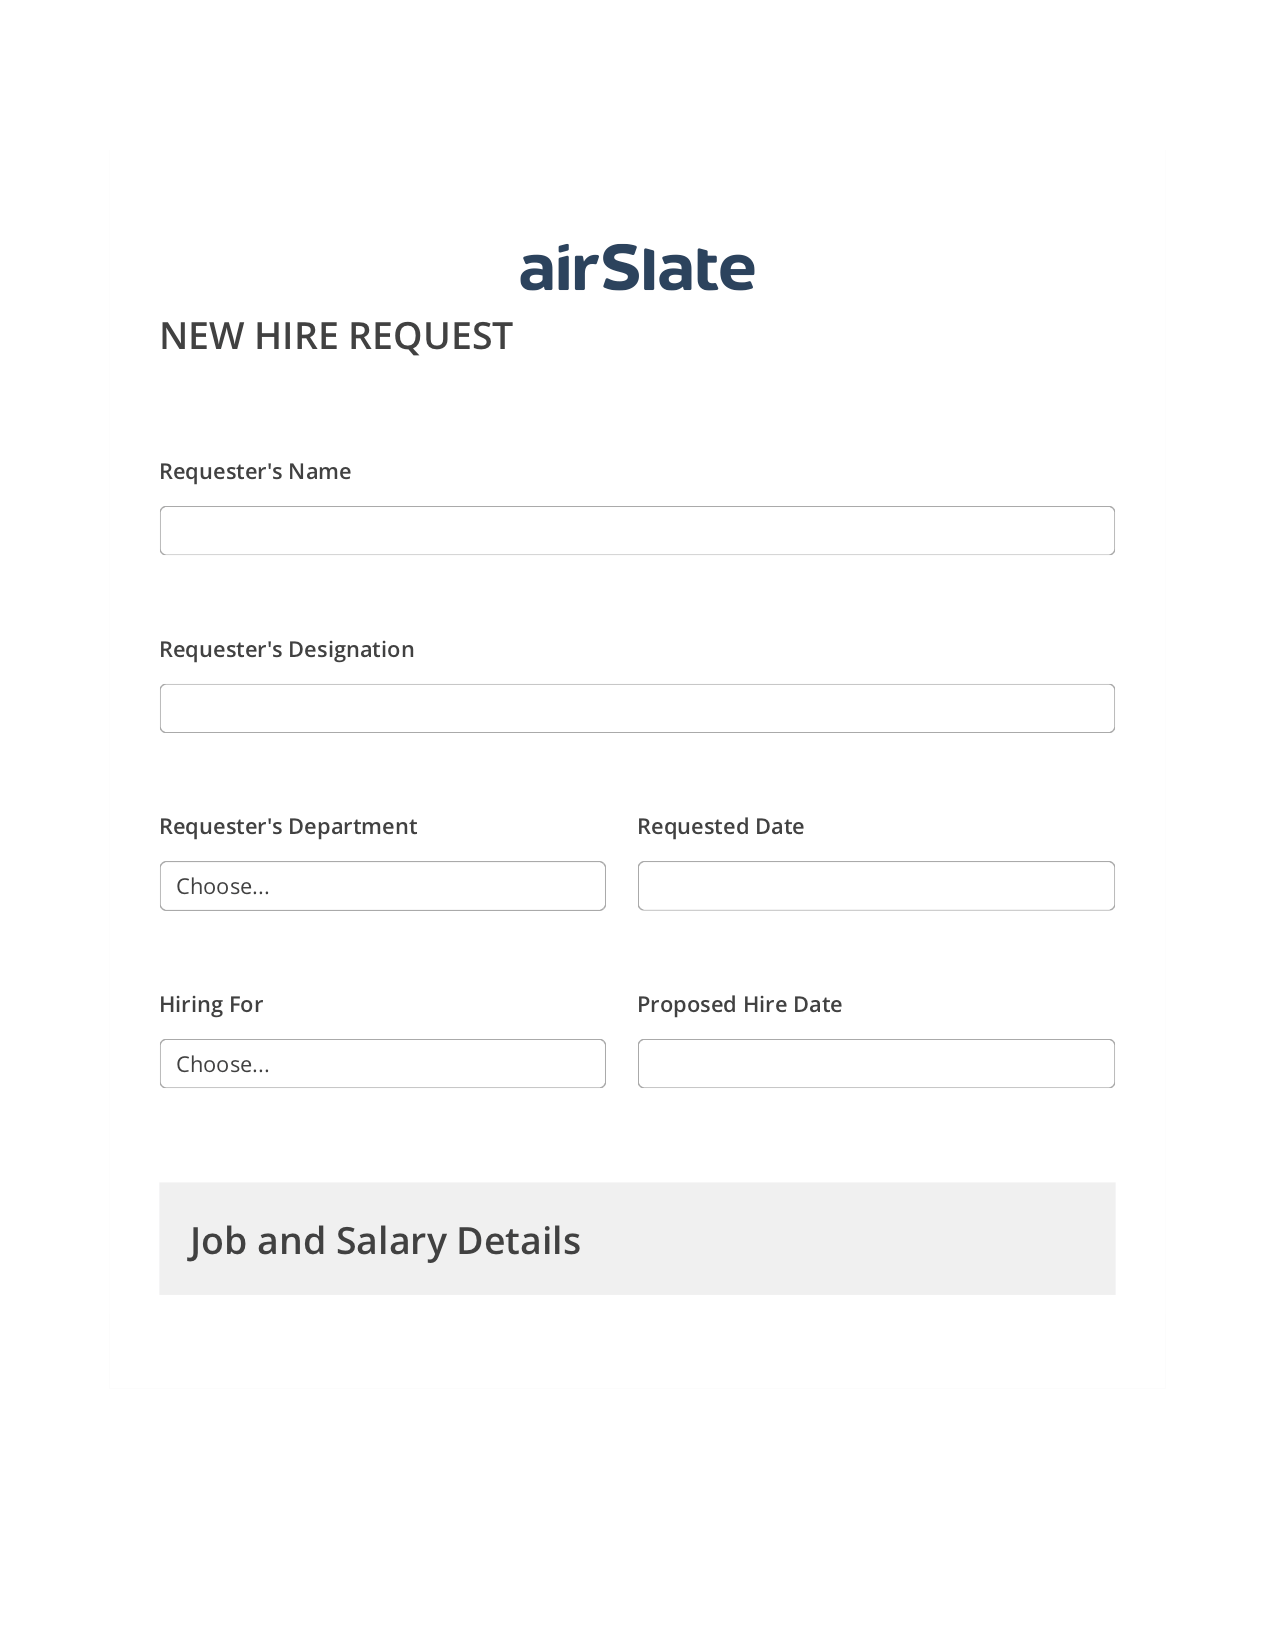 Hiring Request Workflow Pre-fill from CSV File Bot, Create Slate Reminder Bot, Archive to Dropbox Bot